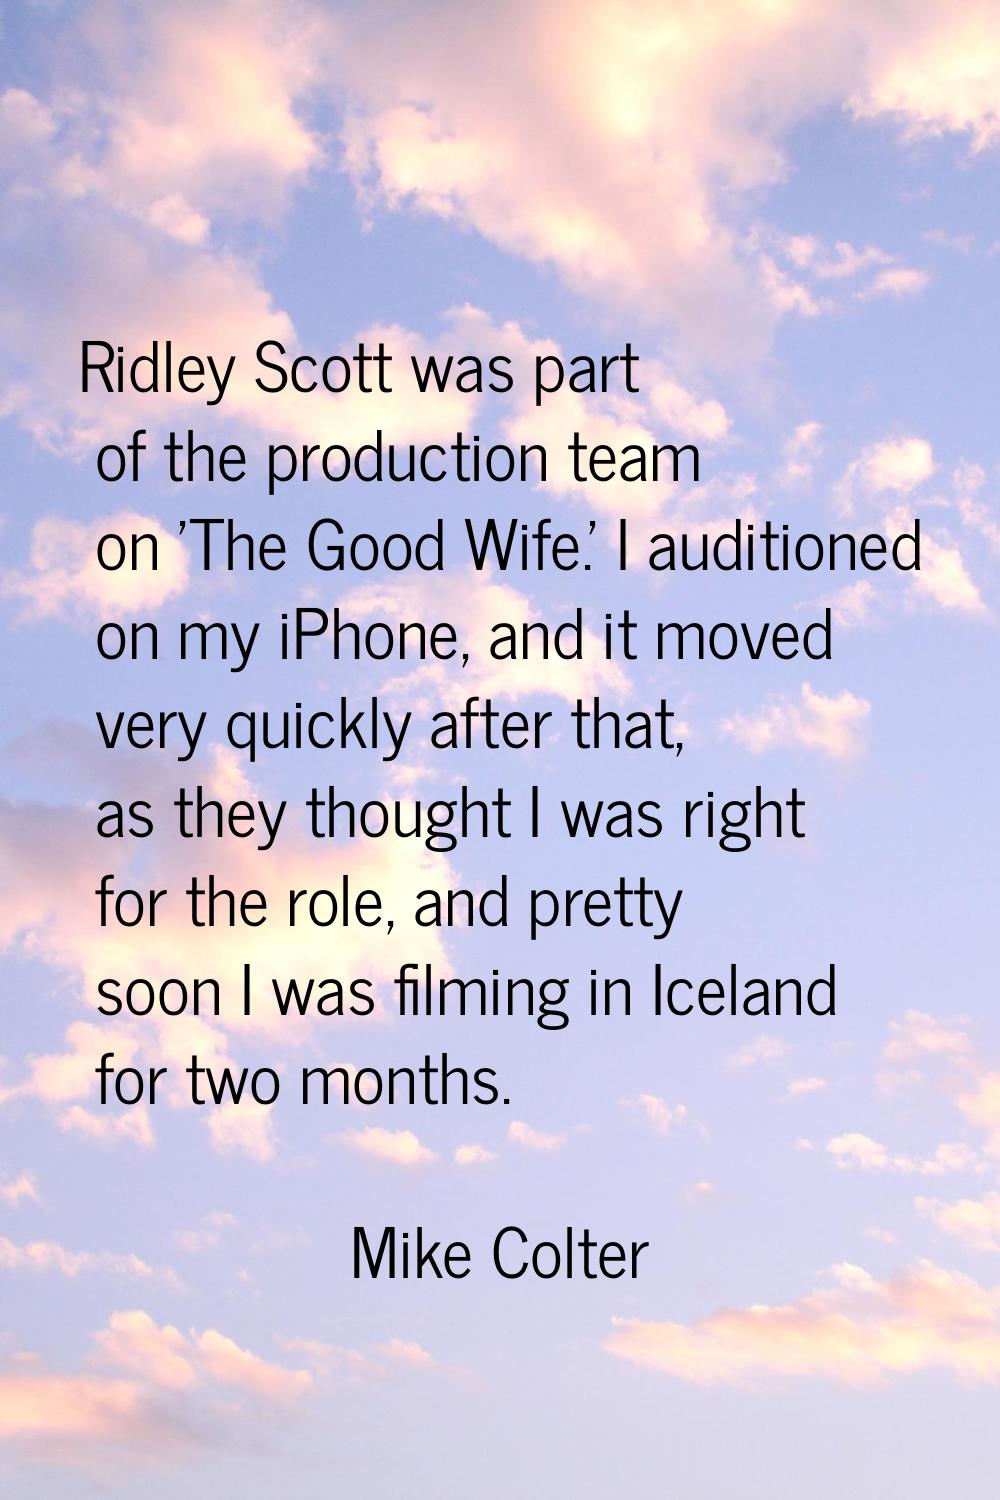 Ridley Scott was part of the production team on 'The Good Wife.' I auditioned on my iPhone, and it 